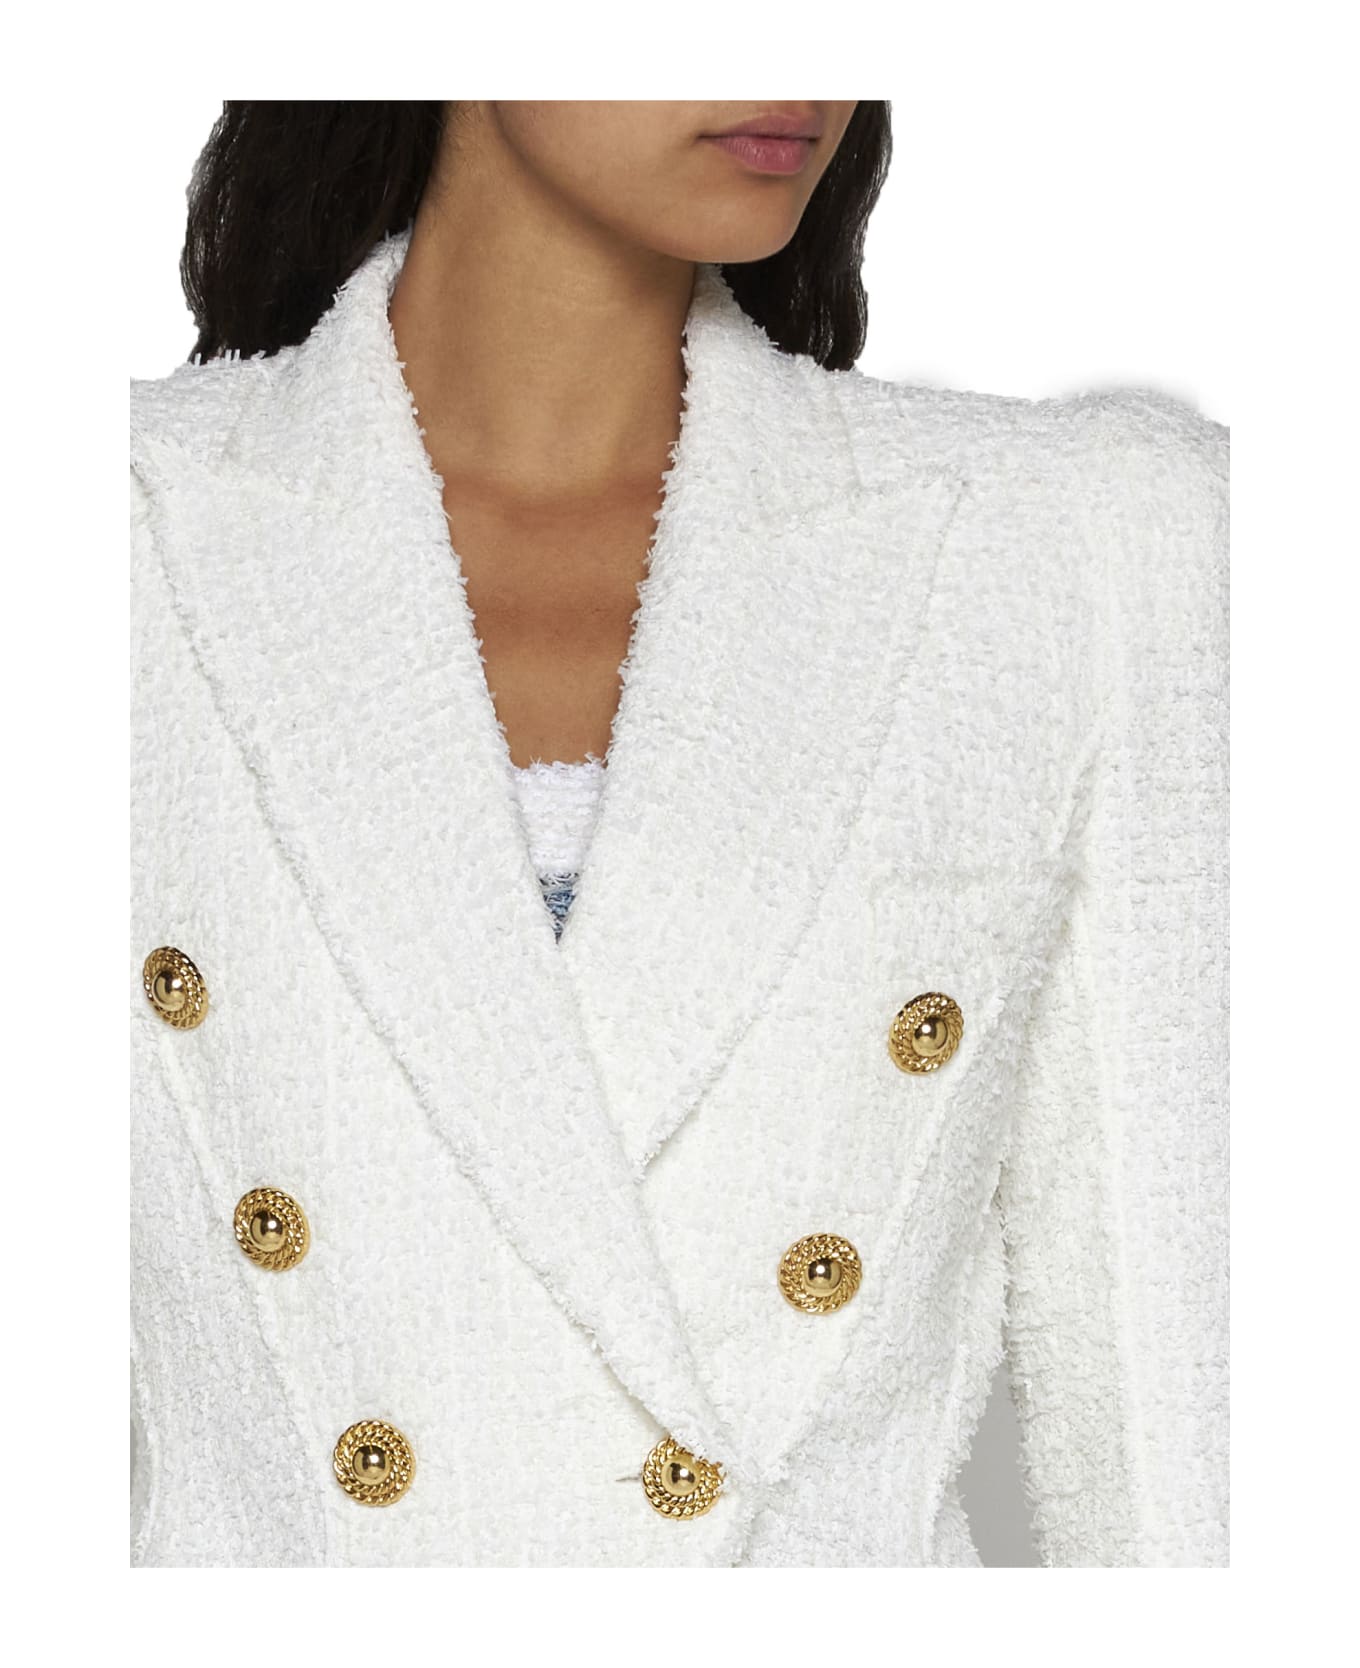 Balmain Double-breasted Tweed Blazer With Logo Buttons - Blanc